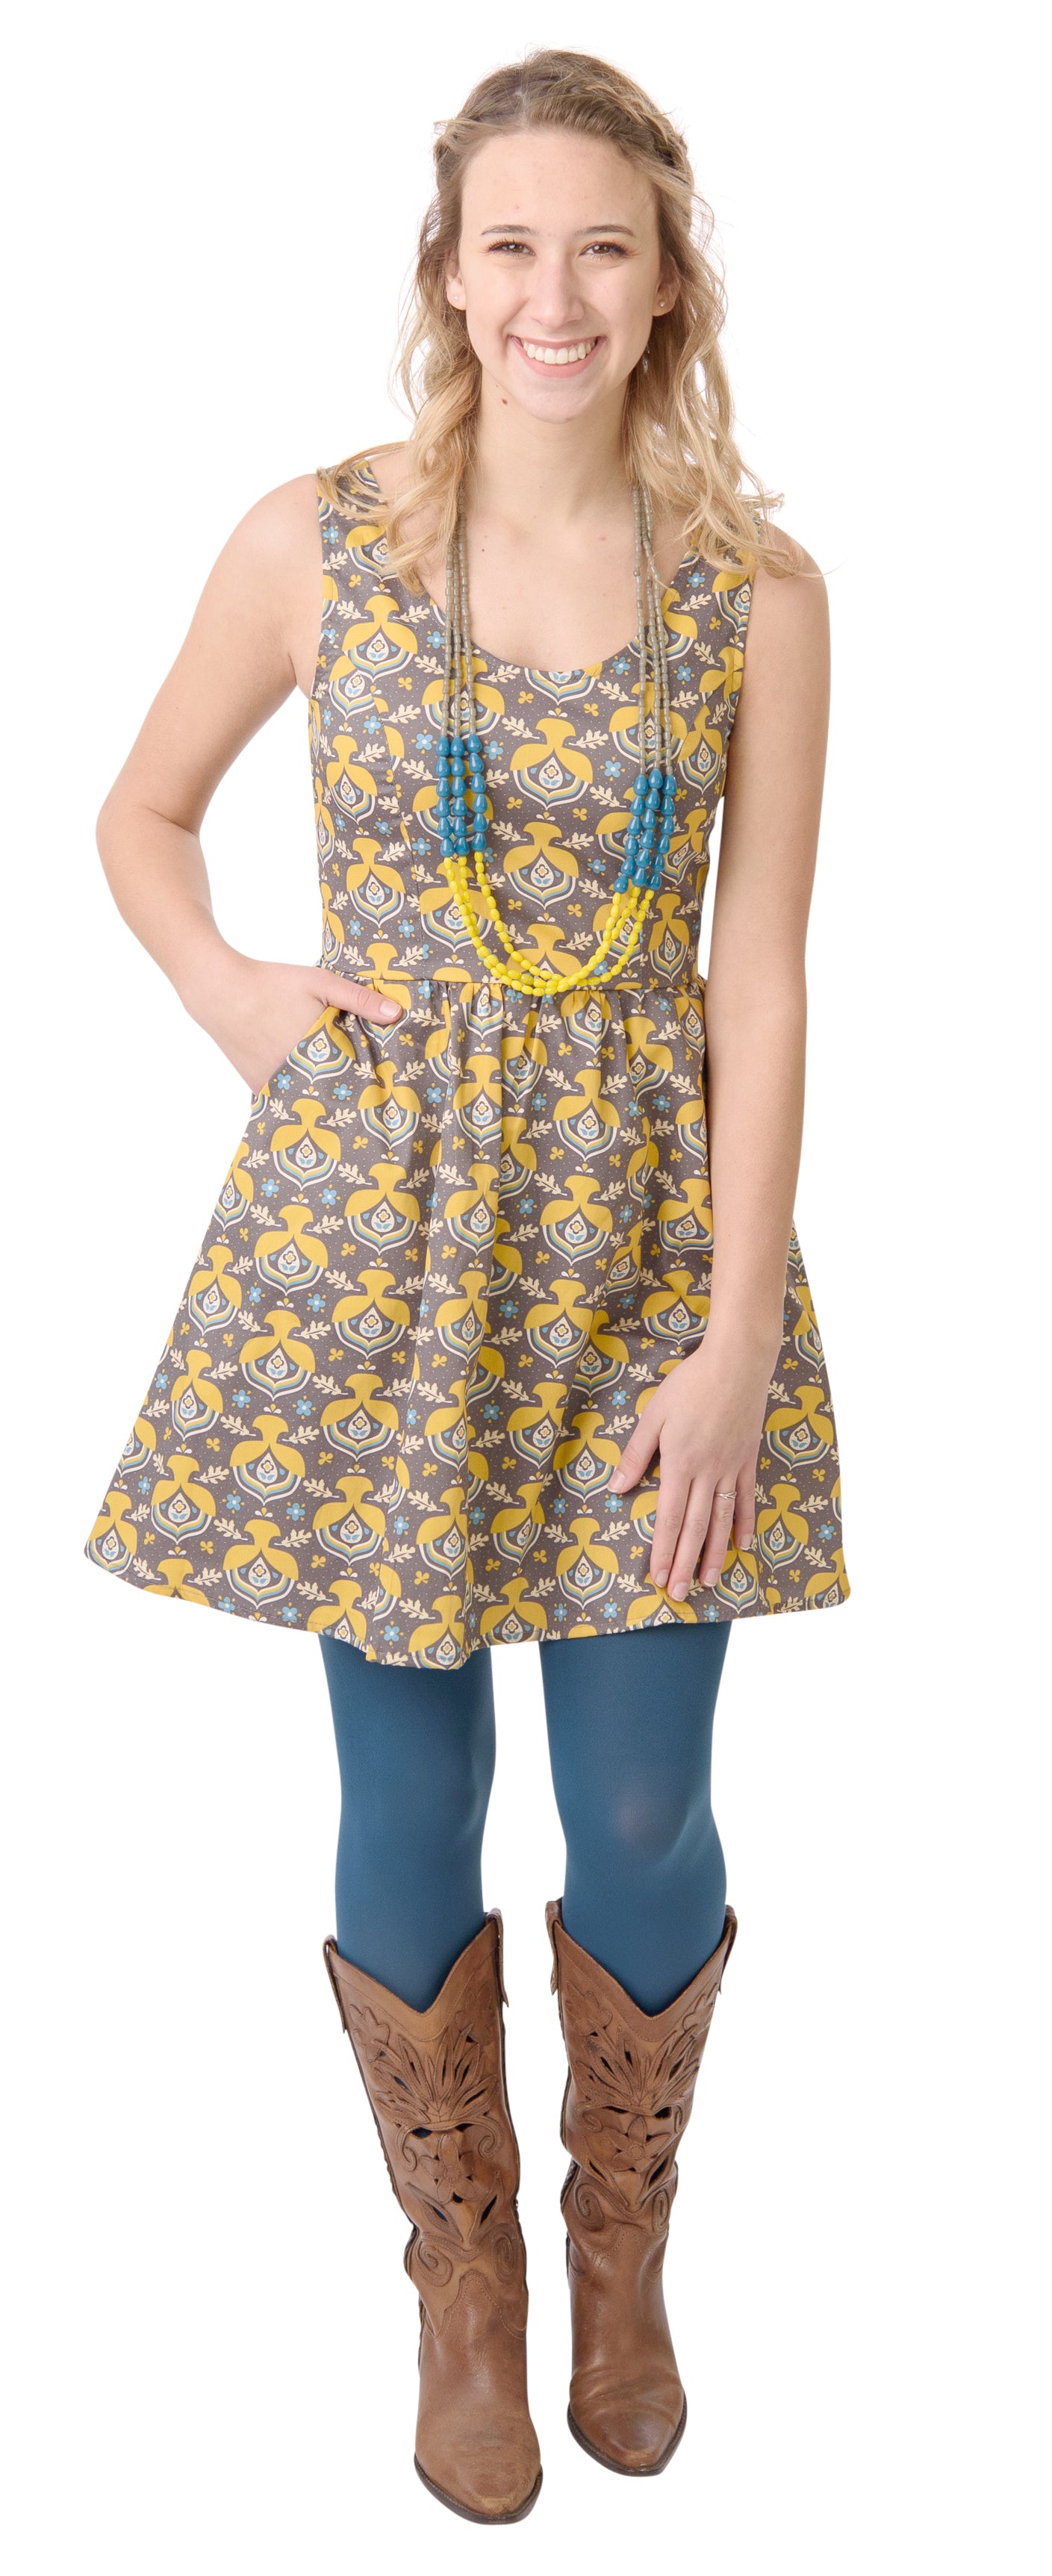 Grey cotton poplin fit and flare knee length dress with bright yellow, aqua  and yellow acorn print